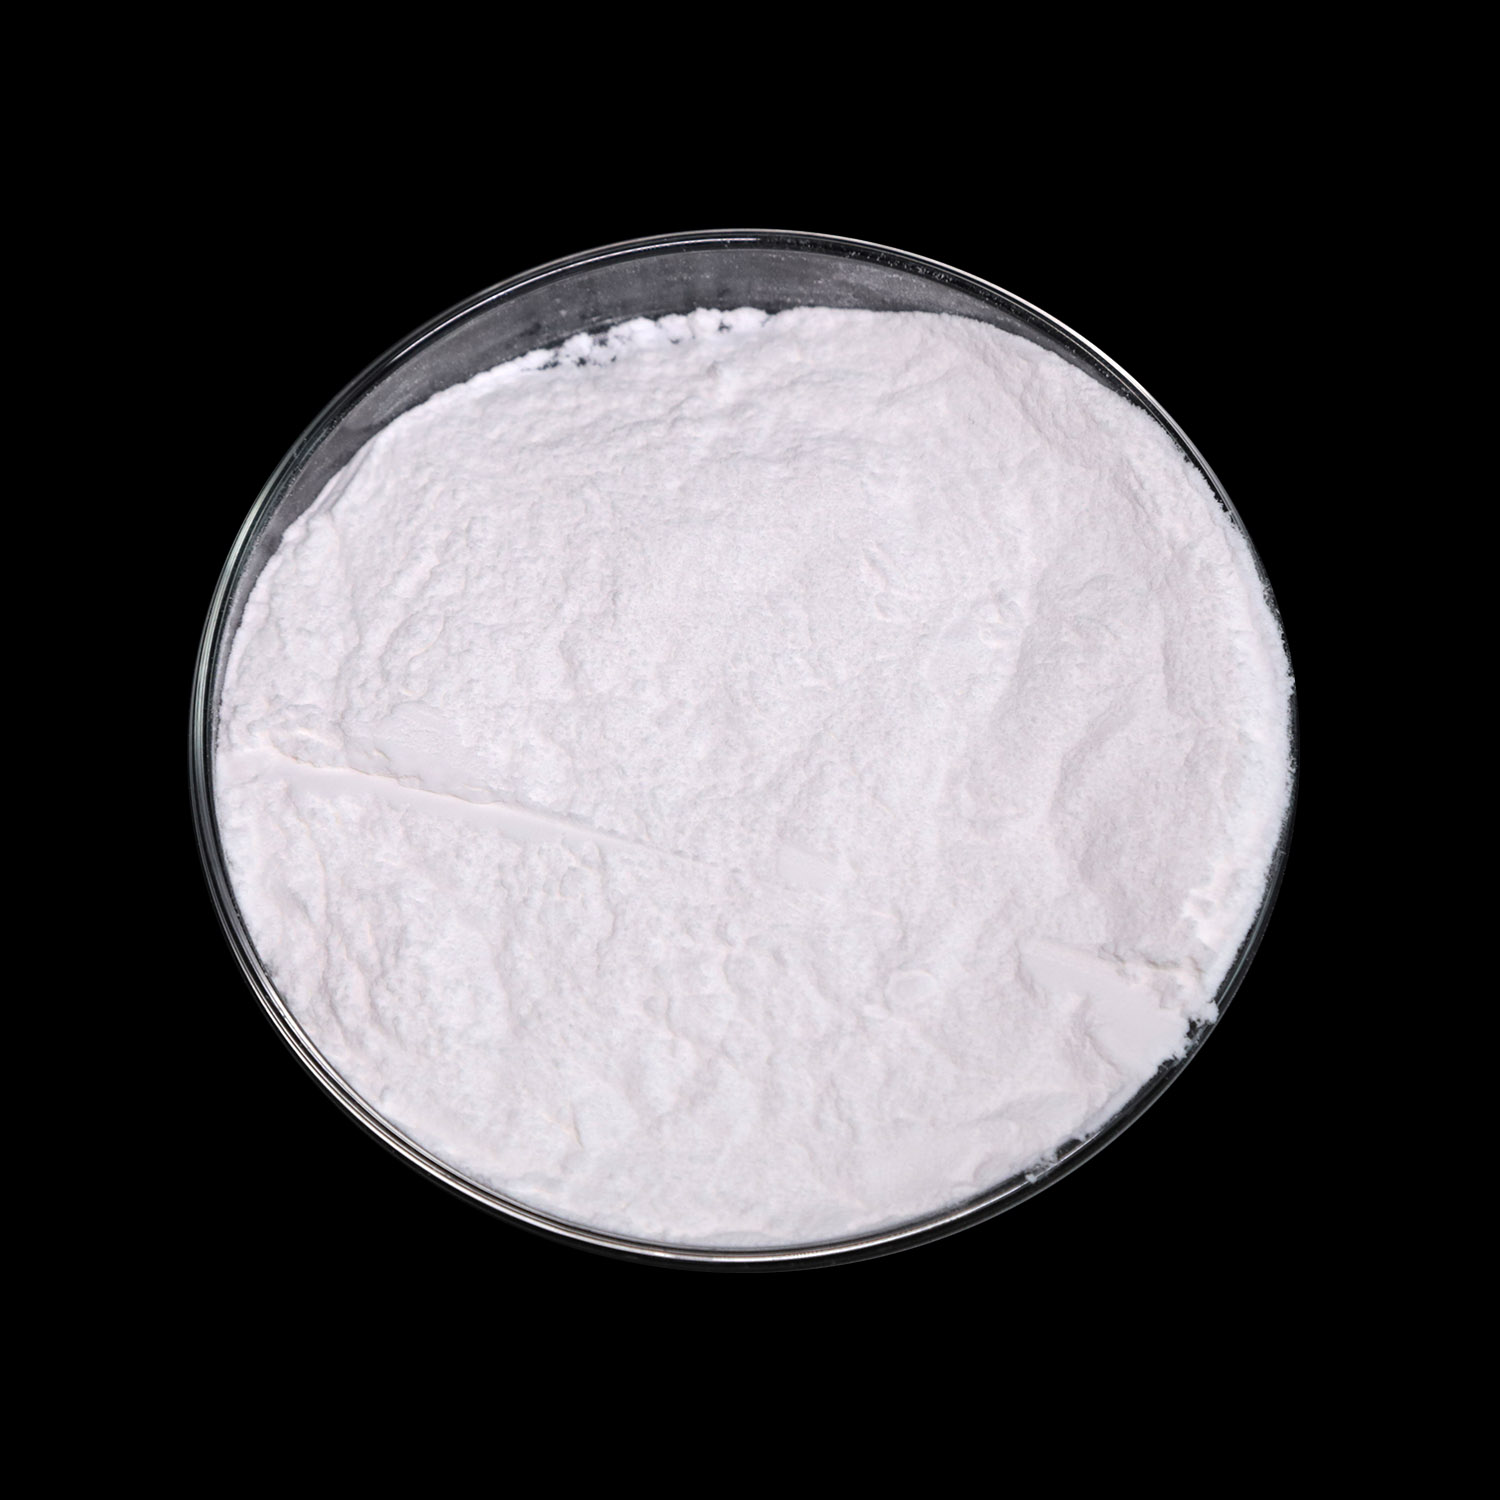  China Professional Manufacturer Supply Powder 2-iodo-1-p-tolyl-propan-1-one 236117-38-7